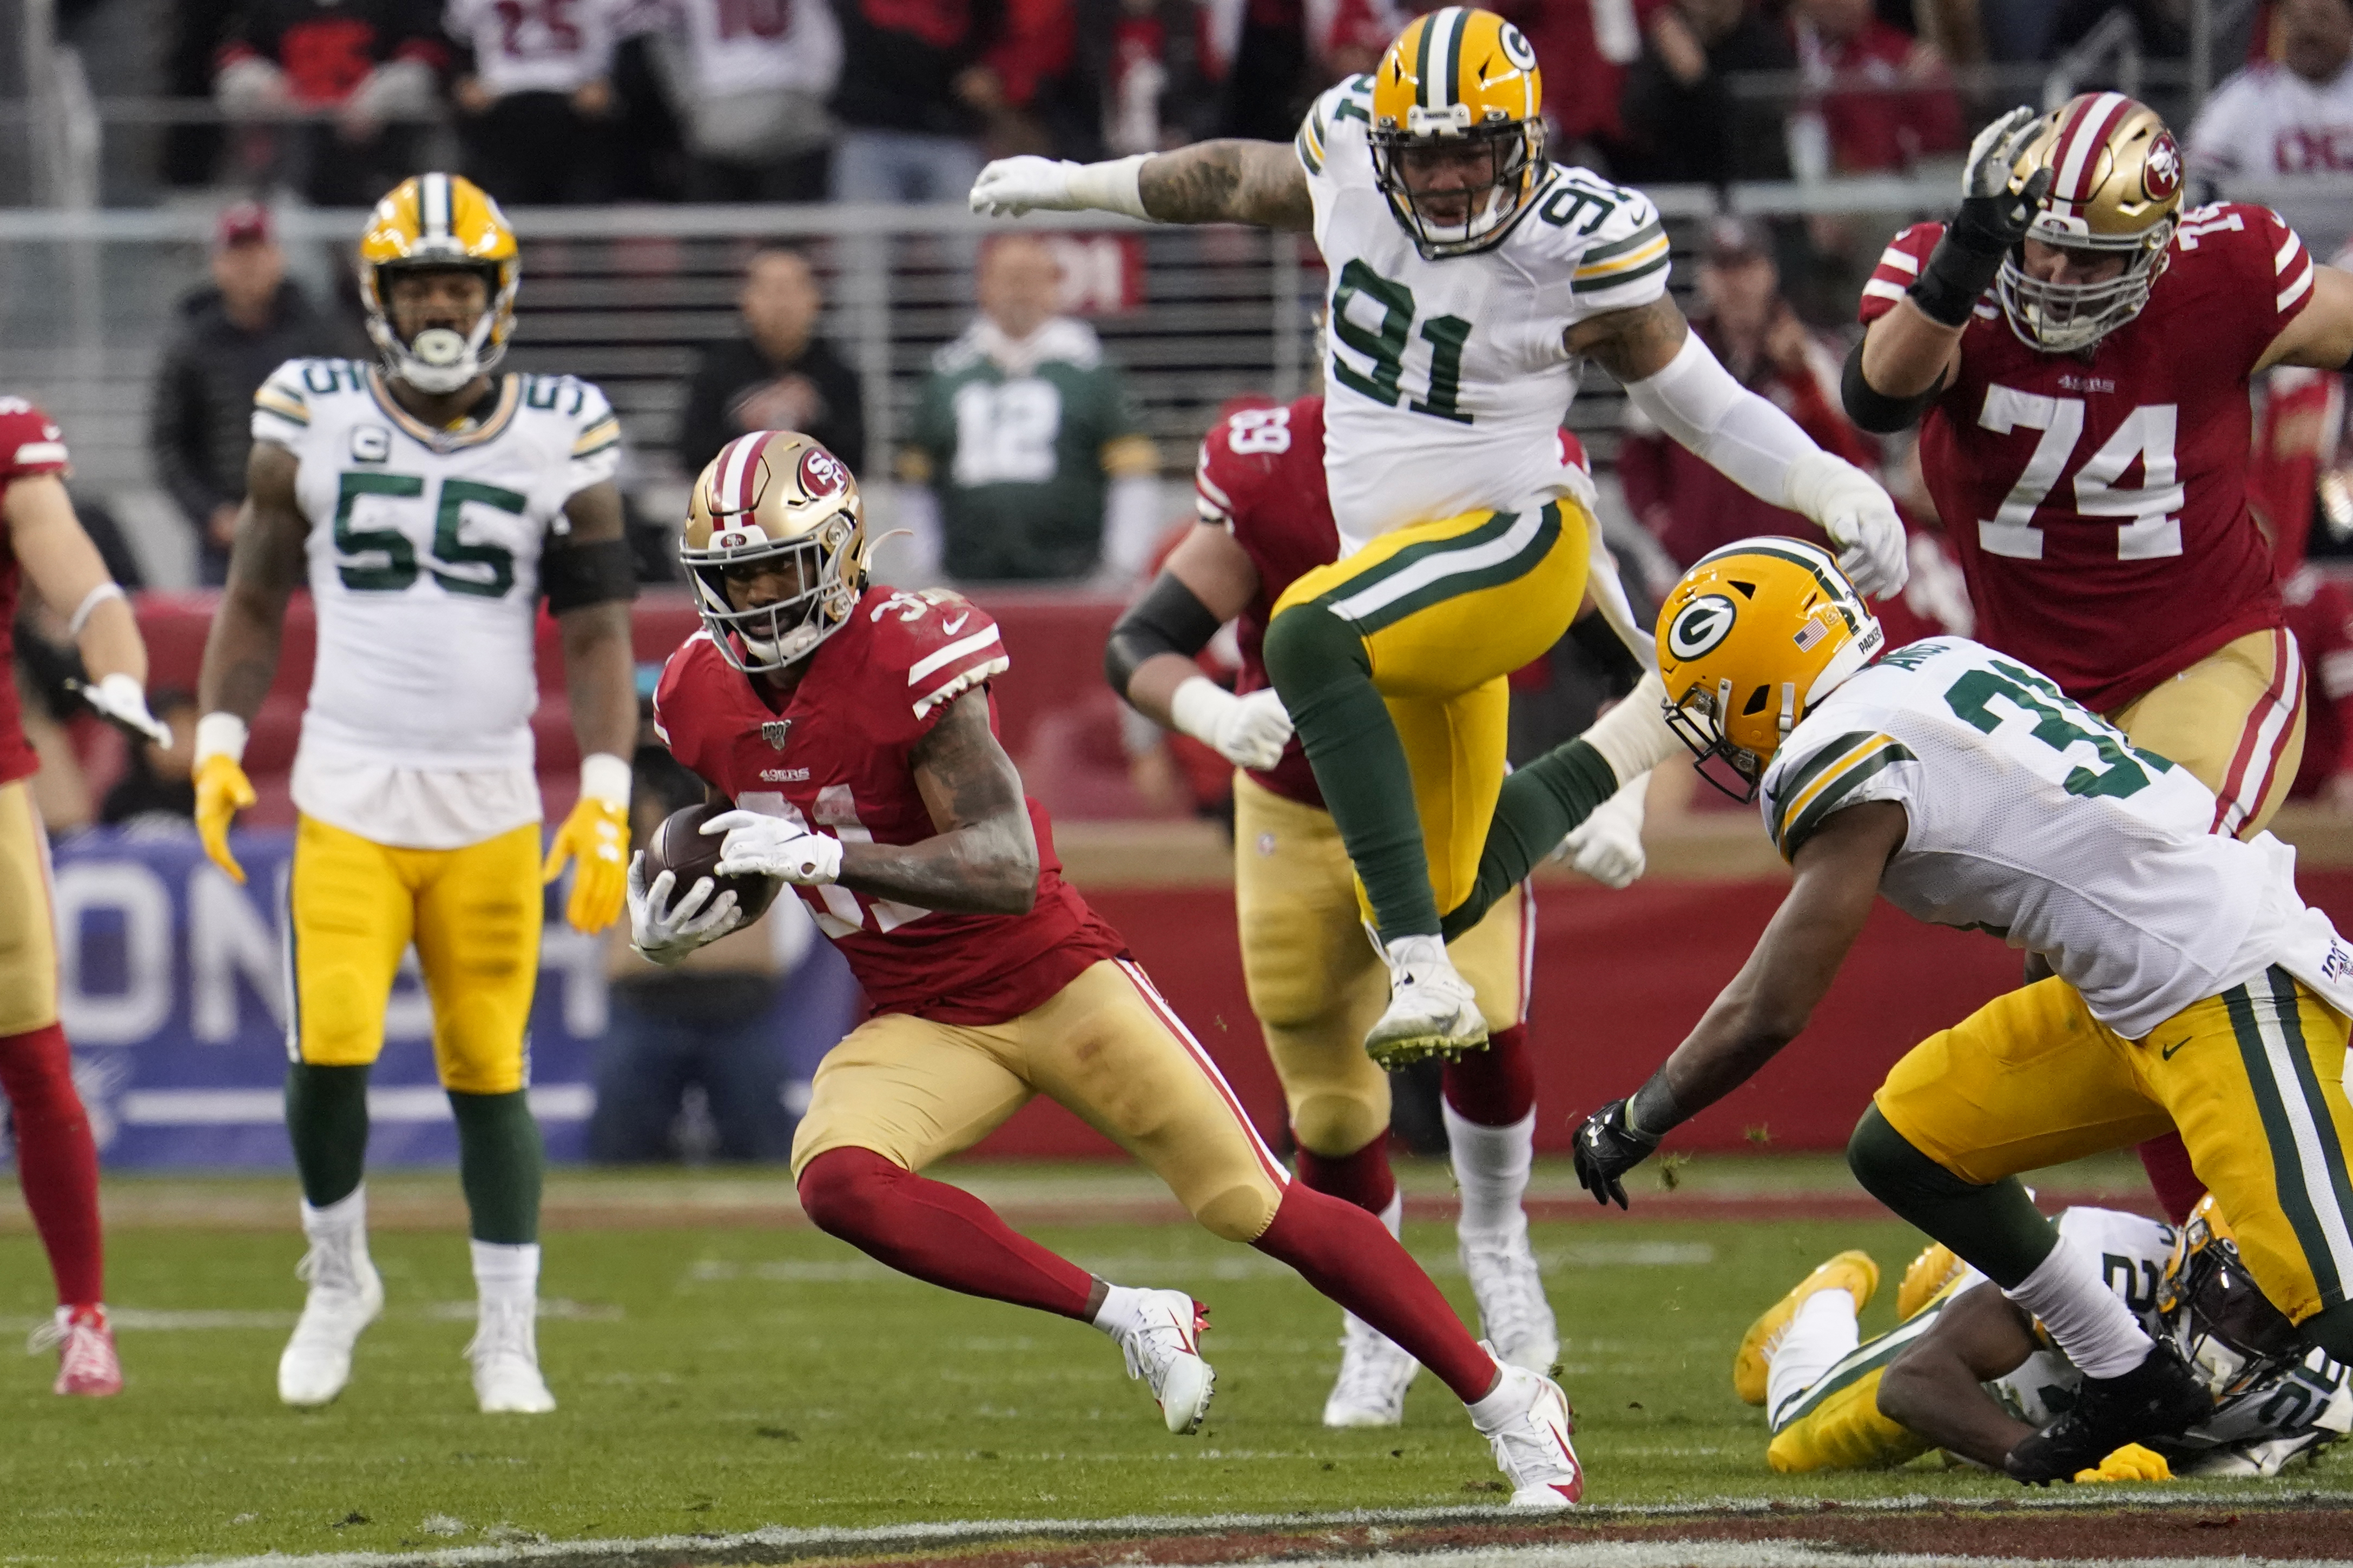 San Francisco 49ers run over Green Bay Packers for spot in Super Bowl